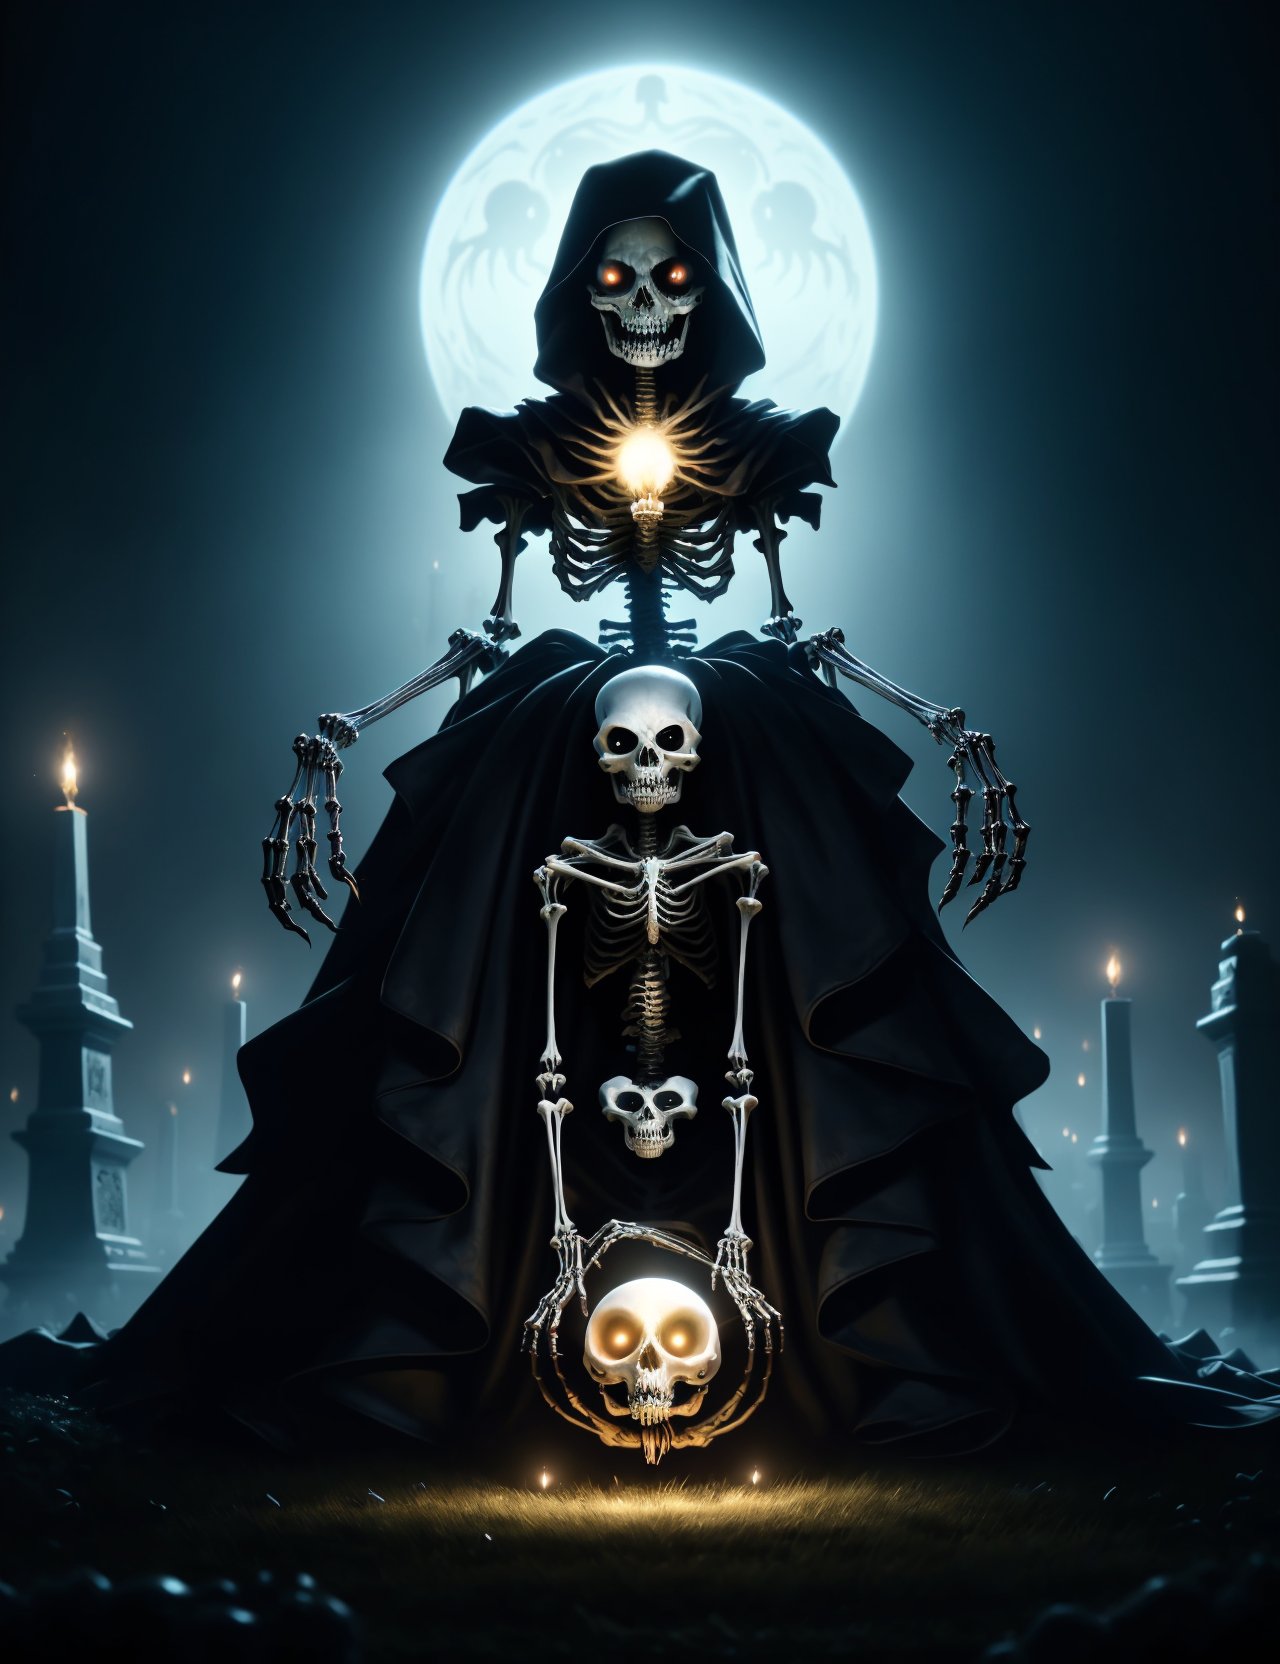 hyper detailed masterpiece, dynamic, awesome quality,DonMSt33lM4g1c mystical pop surrealism vampire countess skeleton cemetery eyeball cupcakes skeletons malevolent laugh phantom lanterns scarecrows watching classic horror films,  <lora:DonMSt33lM4g1c-000008:0.8>